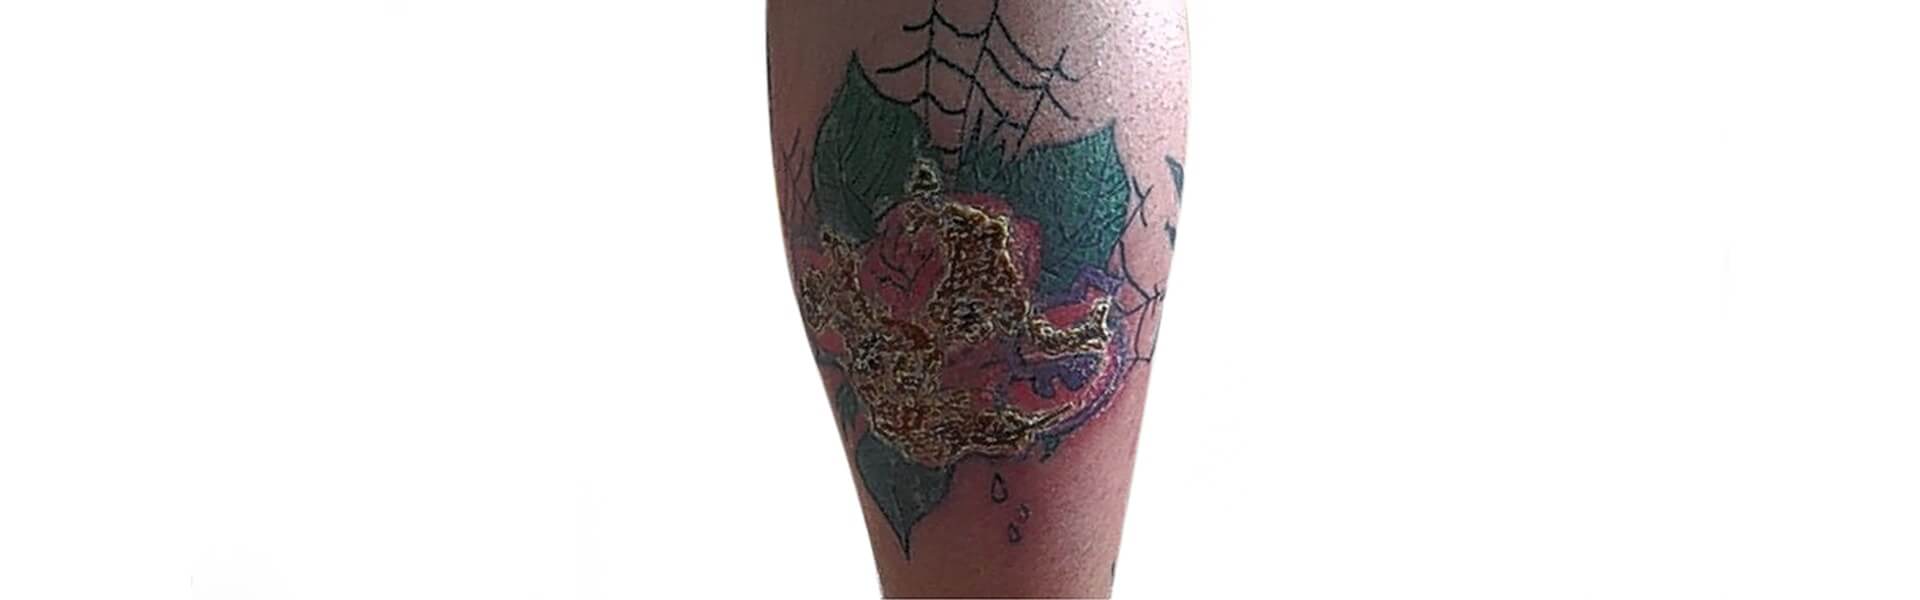 Infected Tattoo: Tips for Identification and Treatment | Skin Design Tattoo